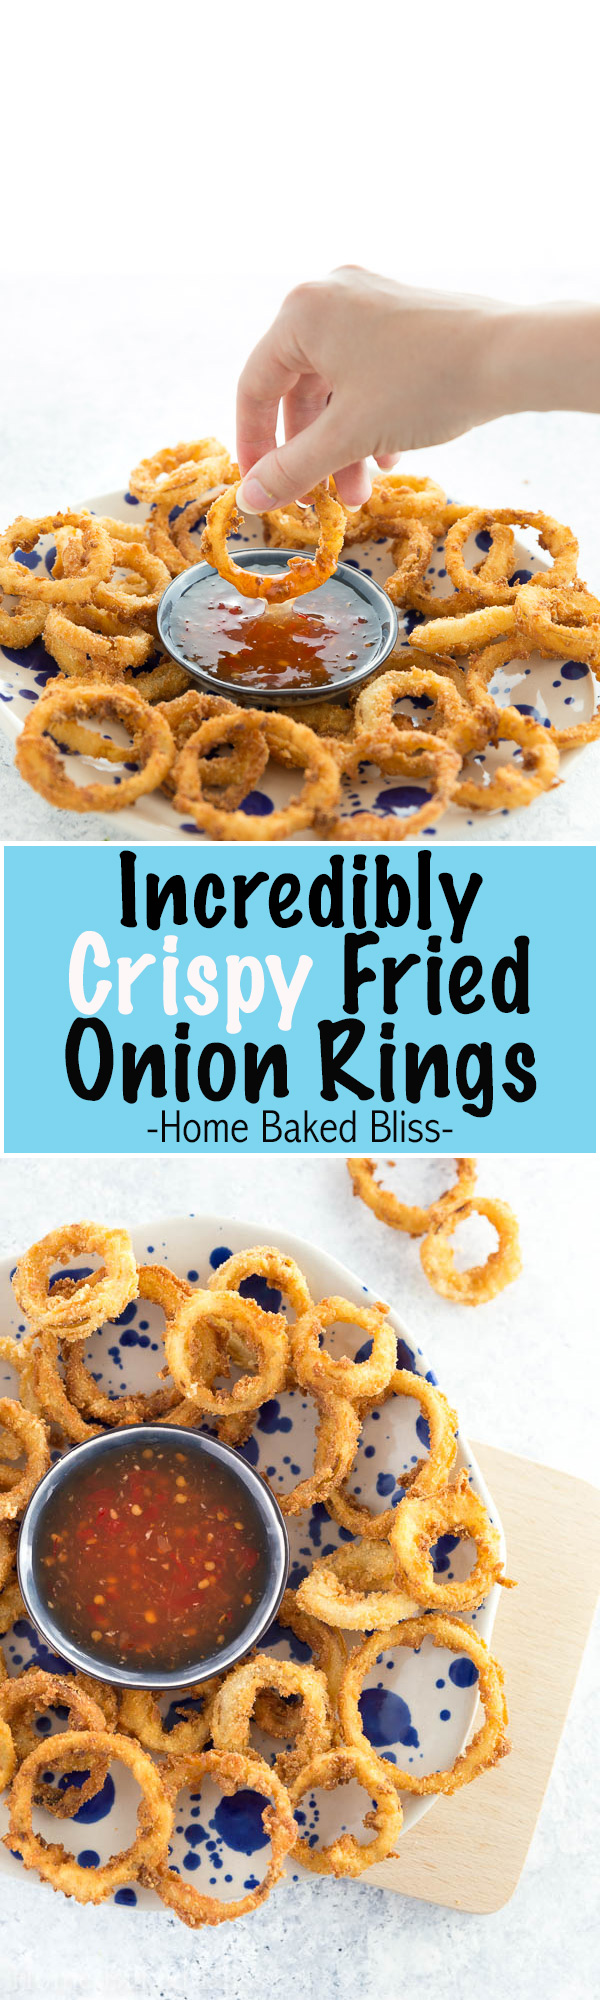 Incredibly crispy onion rings, coated in panko crumbs and deep fried. Perfect as a party snack or alongside a burger.